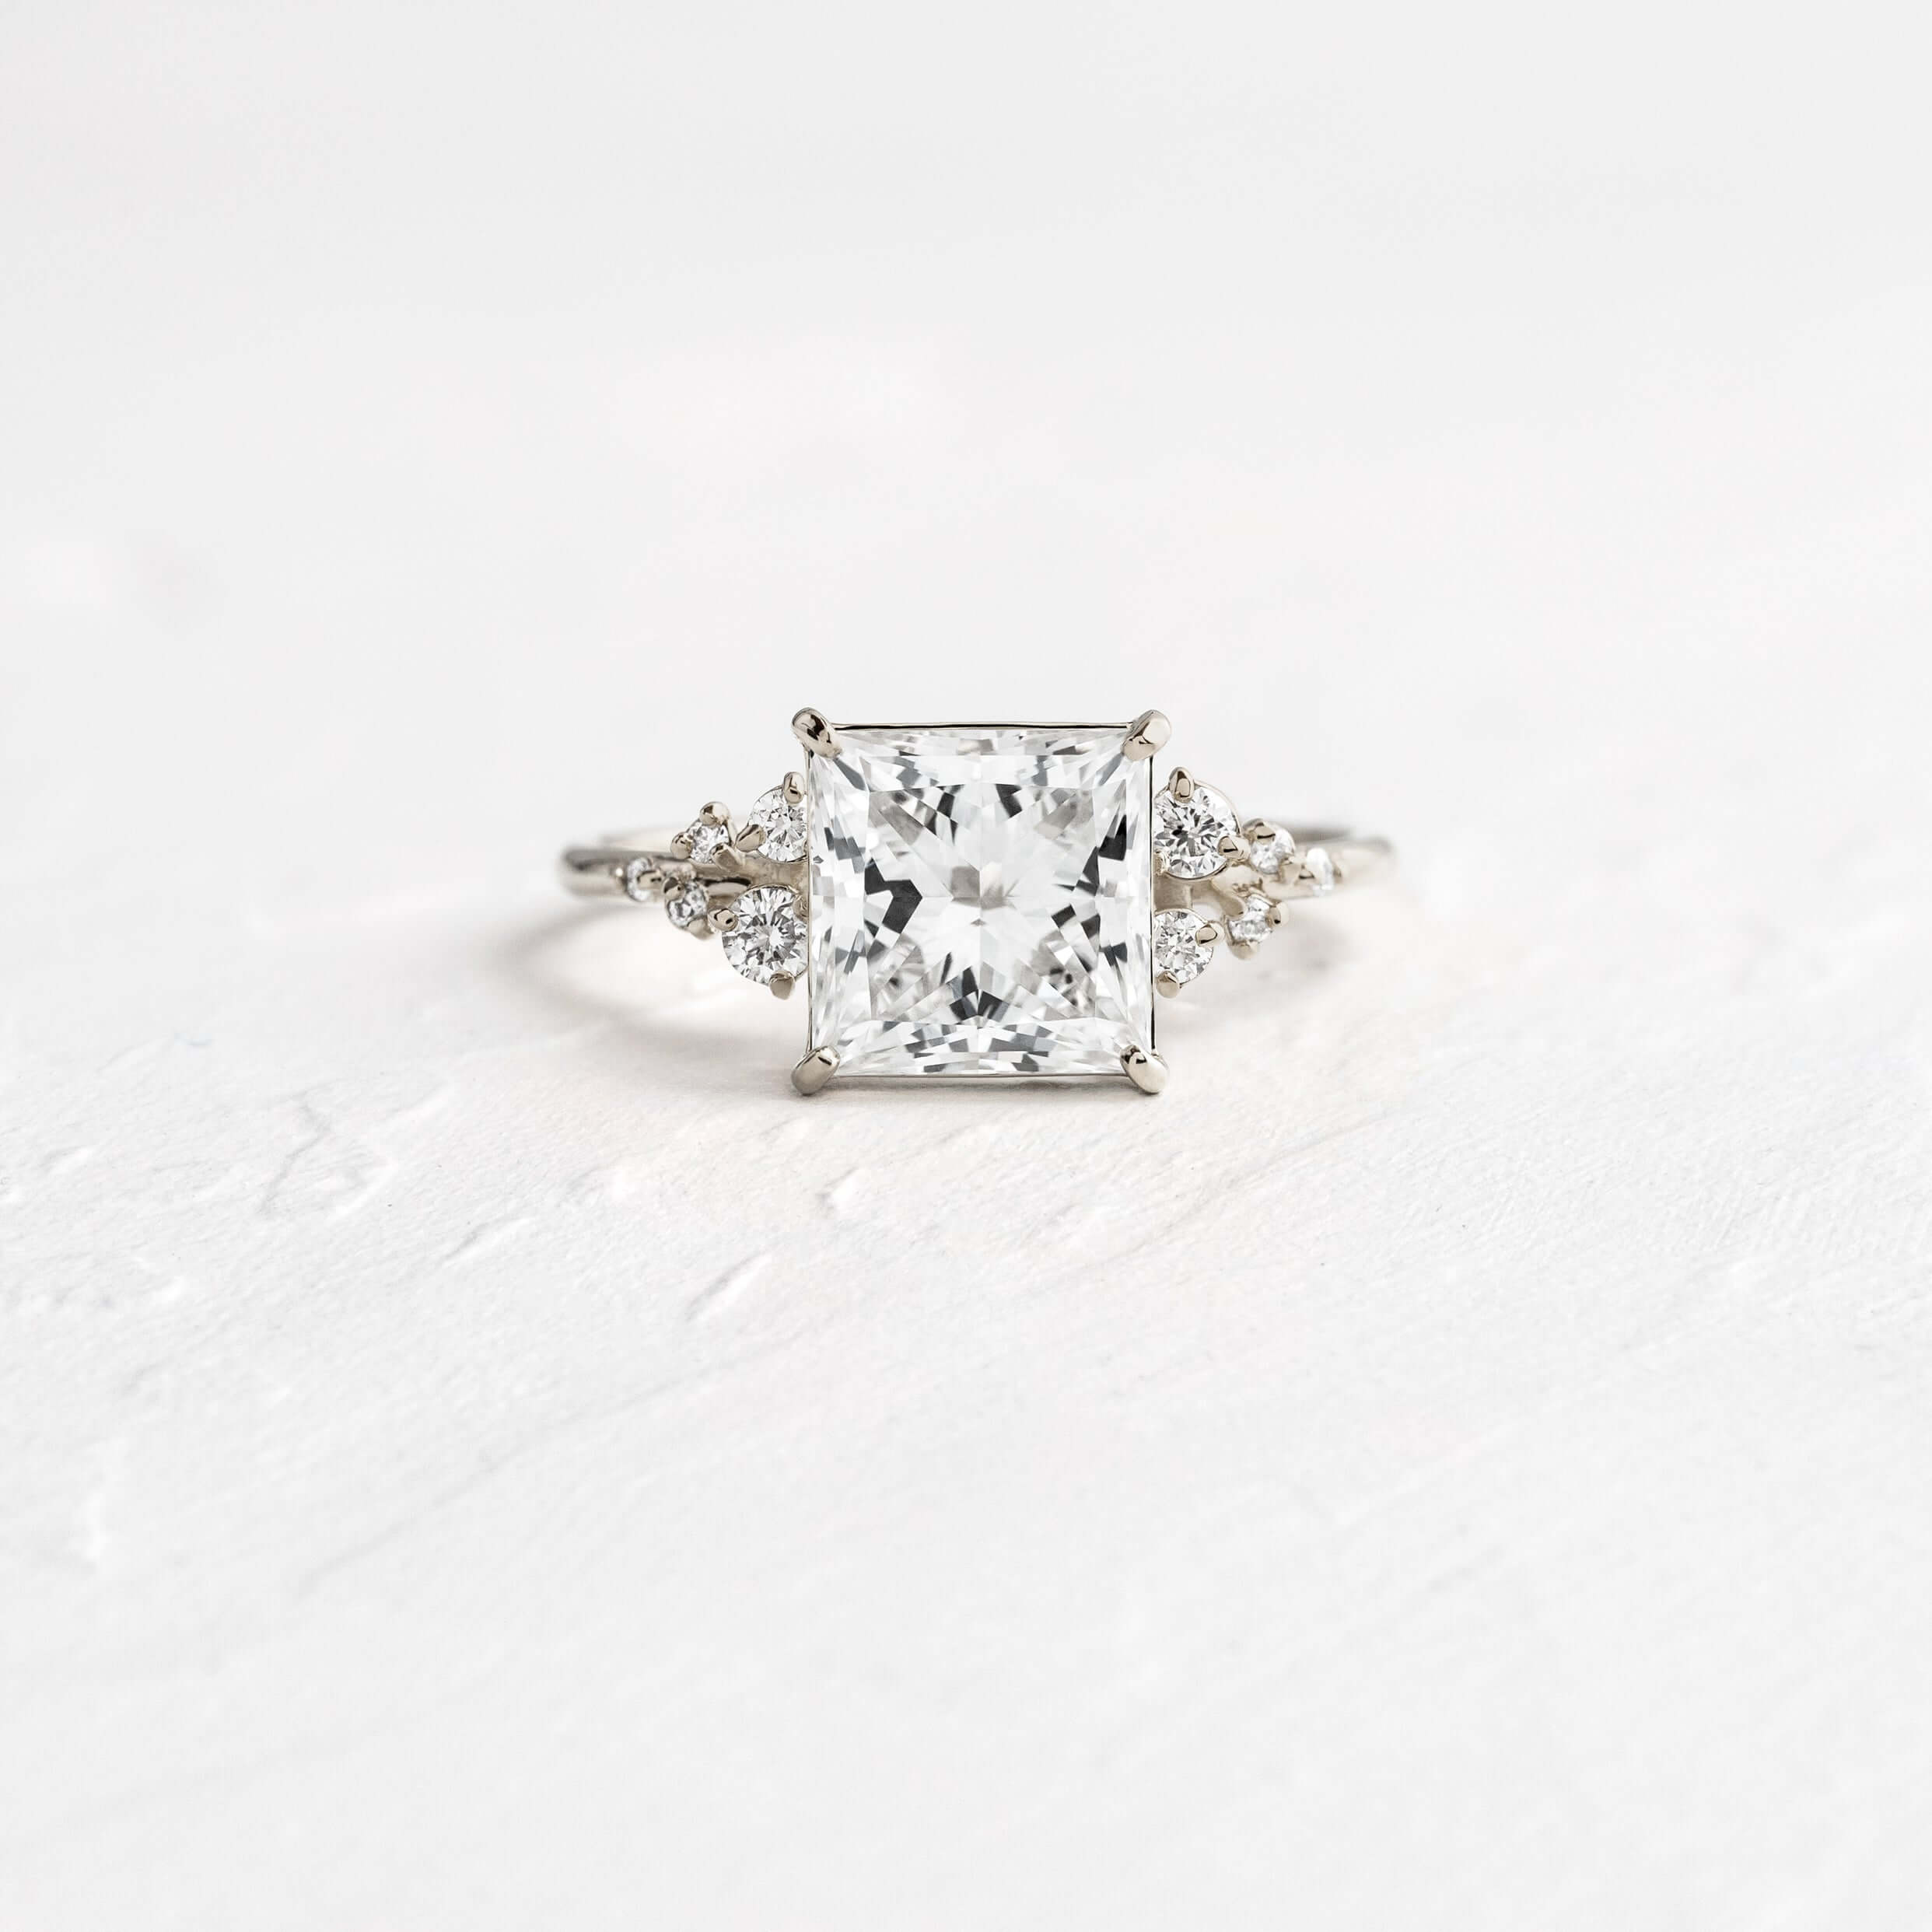 Snowdrift Ring | Handcrafted Engagement Ring | Melanie Casey